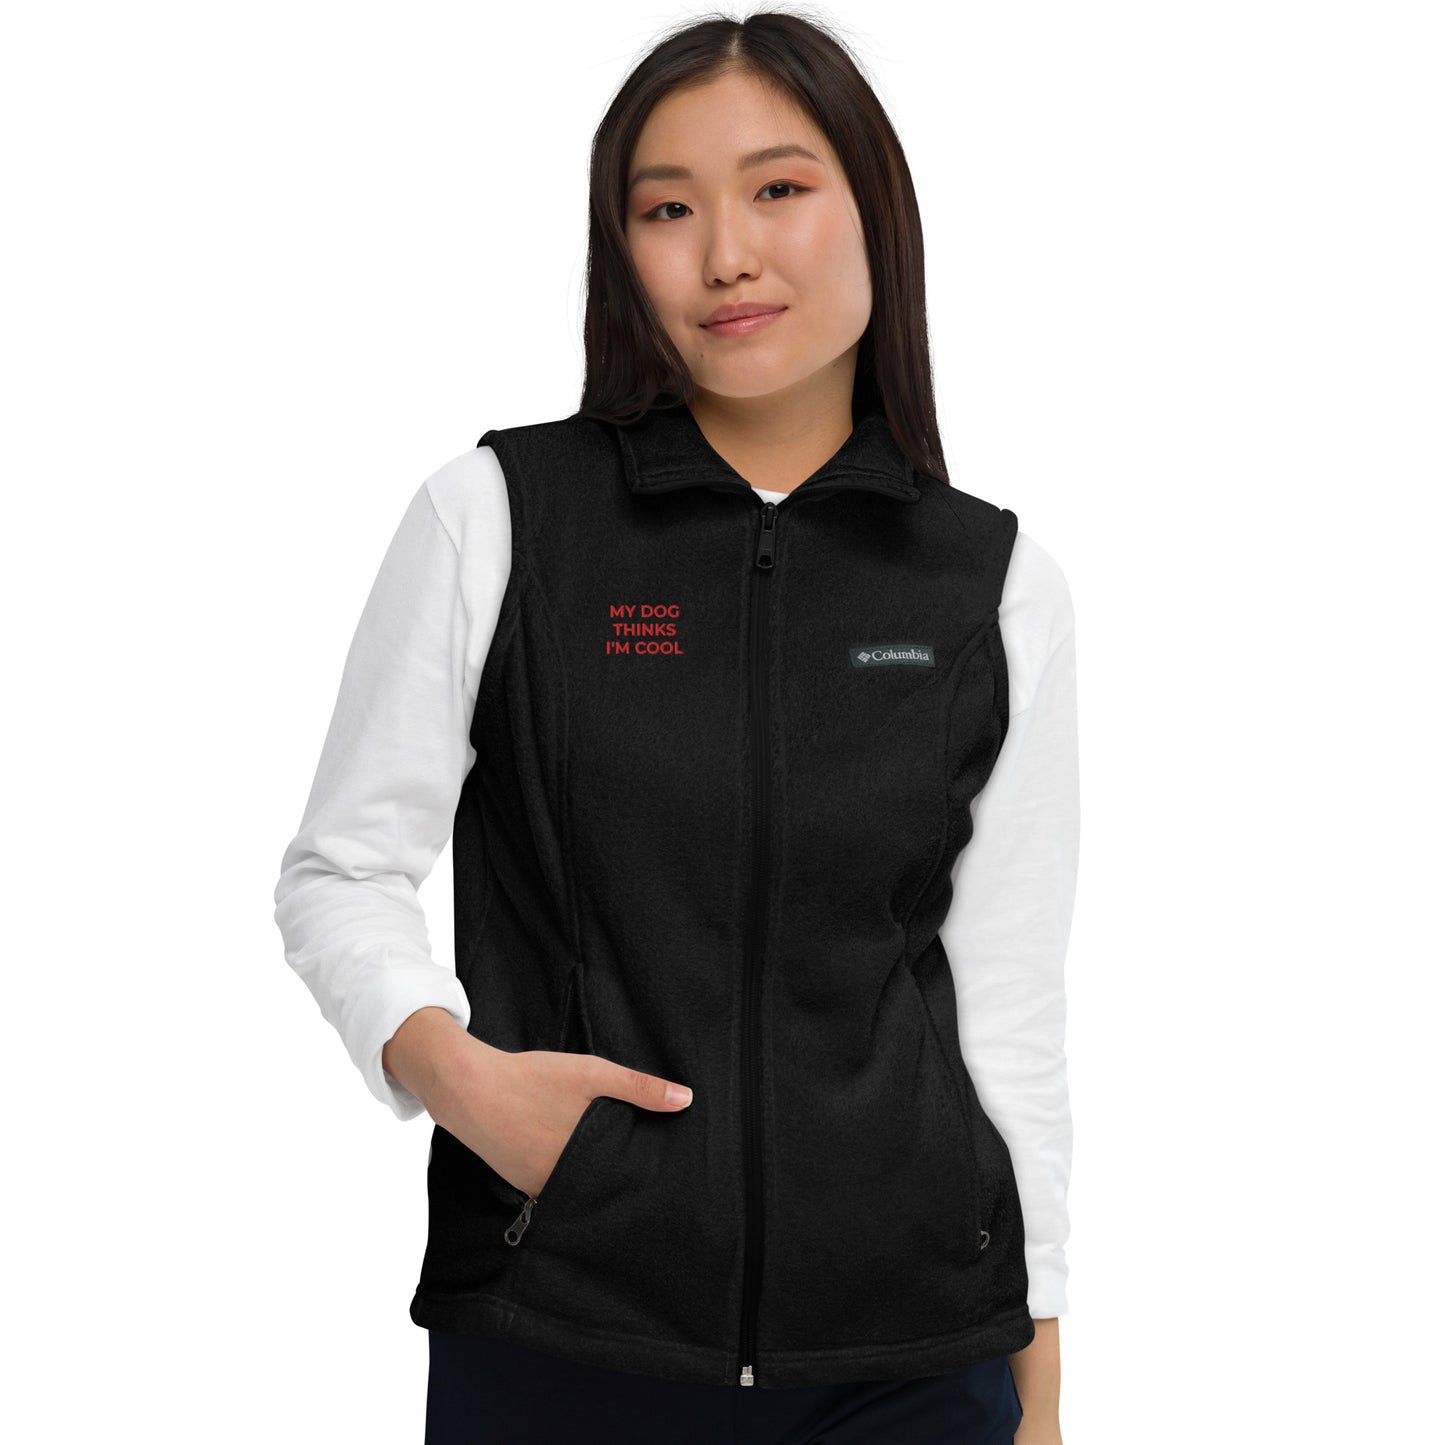 Women’s Columbia fleece vest, flat embroidery, red "MY DOG THINKS I'M COOL"